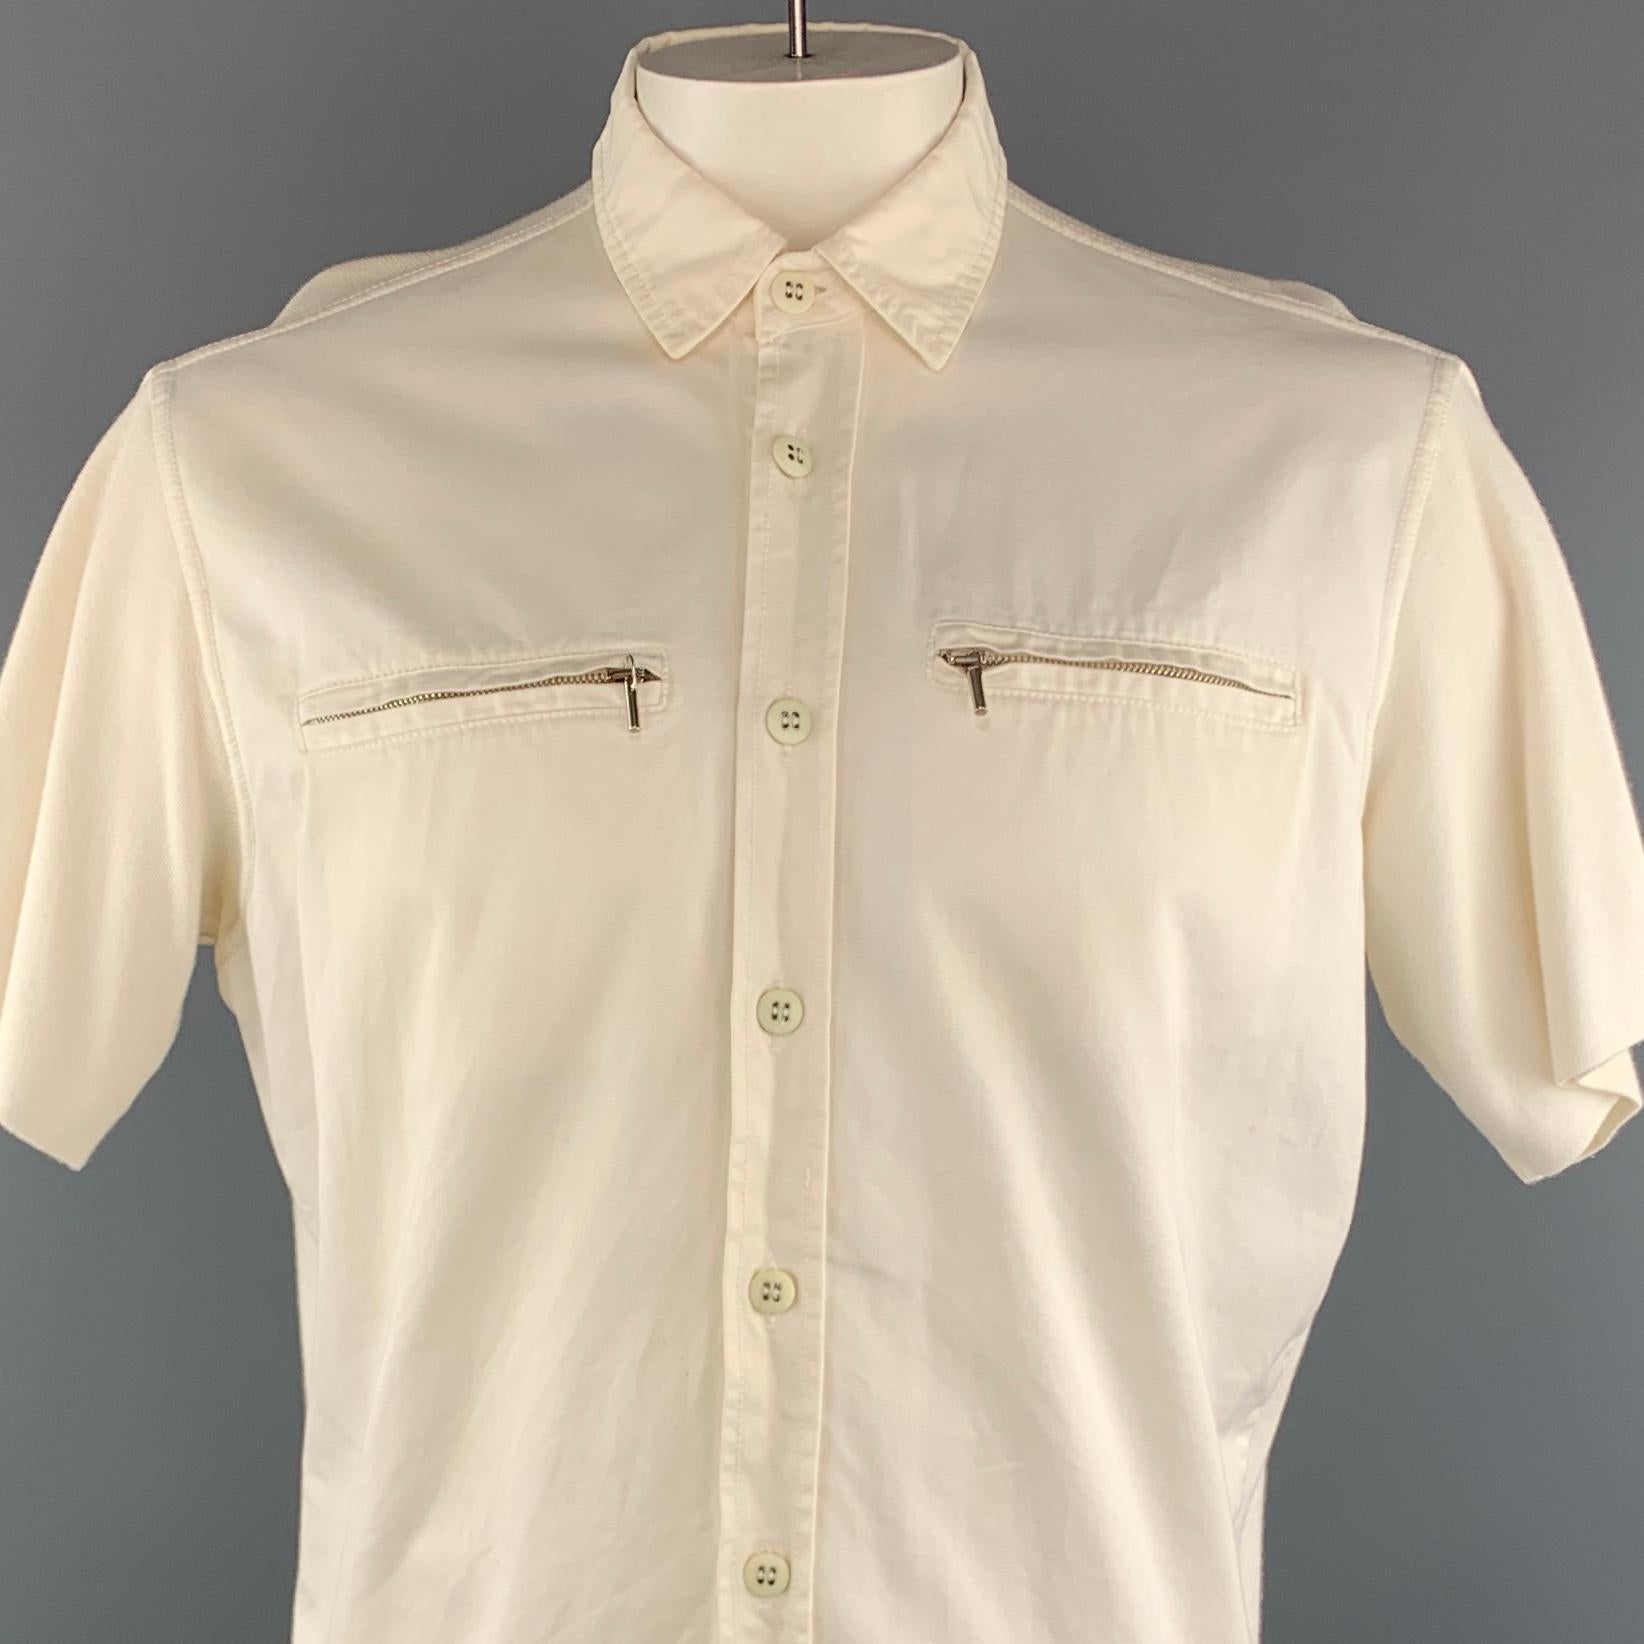 VINTAGE MONTANA short sleeve shirt comes in a off white cotton featuring a button up style, front zipper pockets, and a spread collar. Made in Italy.
 
Very Good Pre-Owned Condition.
Marked: (No size)
 
Measurements:
 
Shoulder: 18 in.
Chest: 48